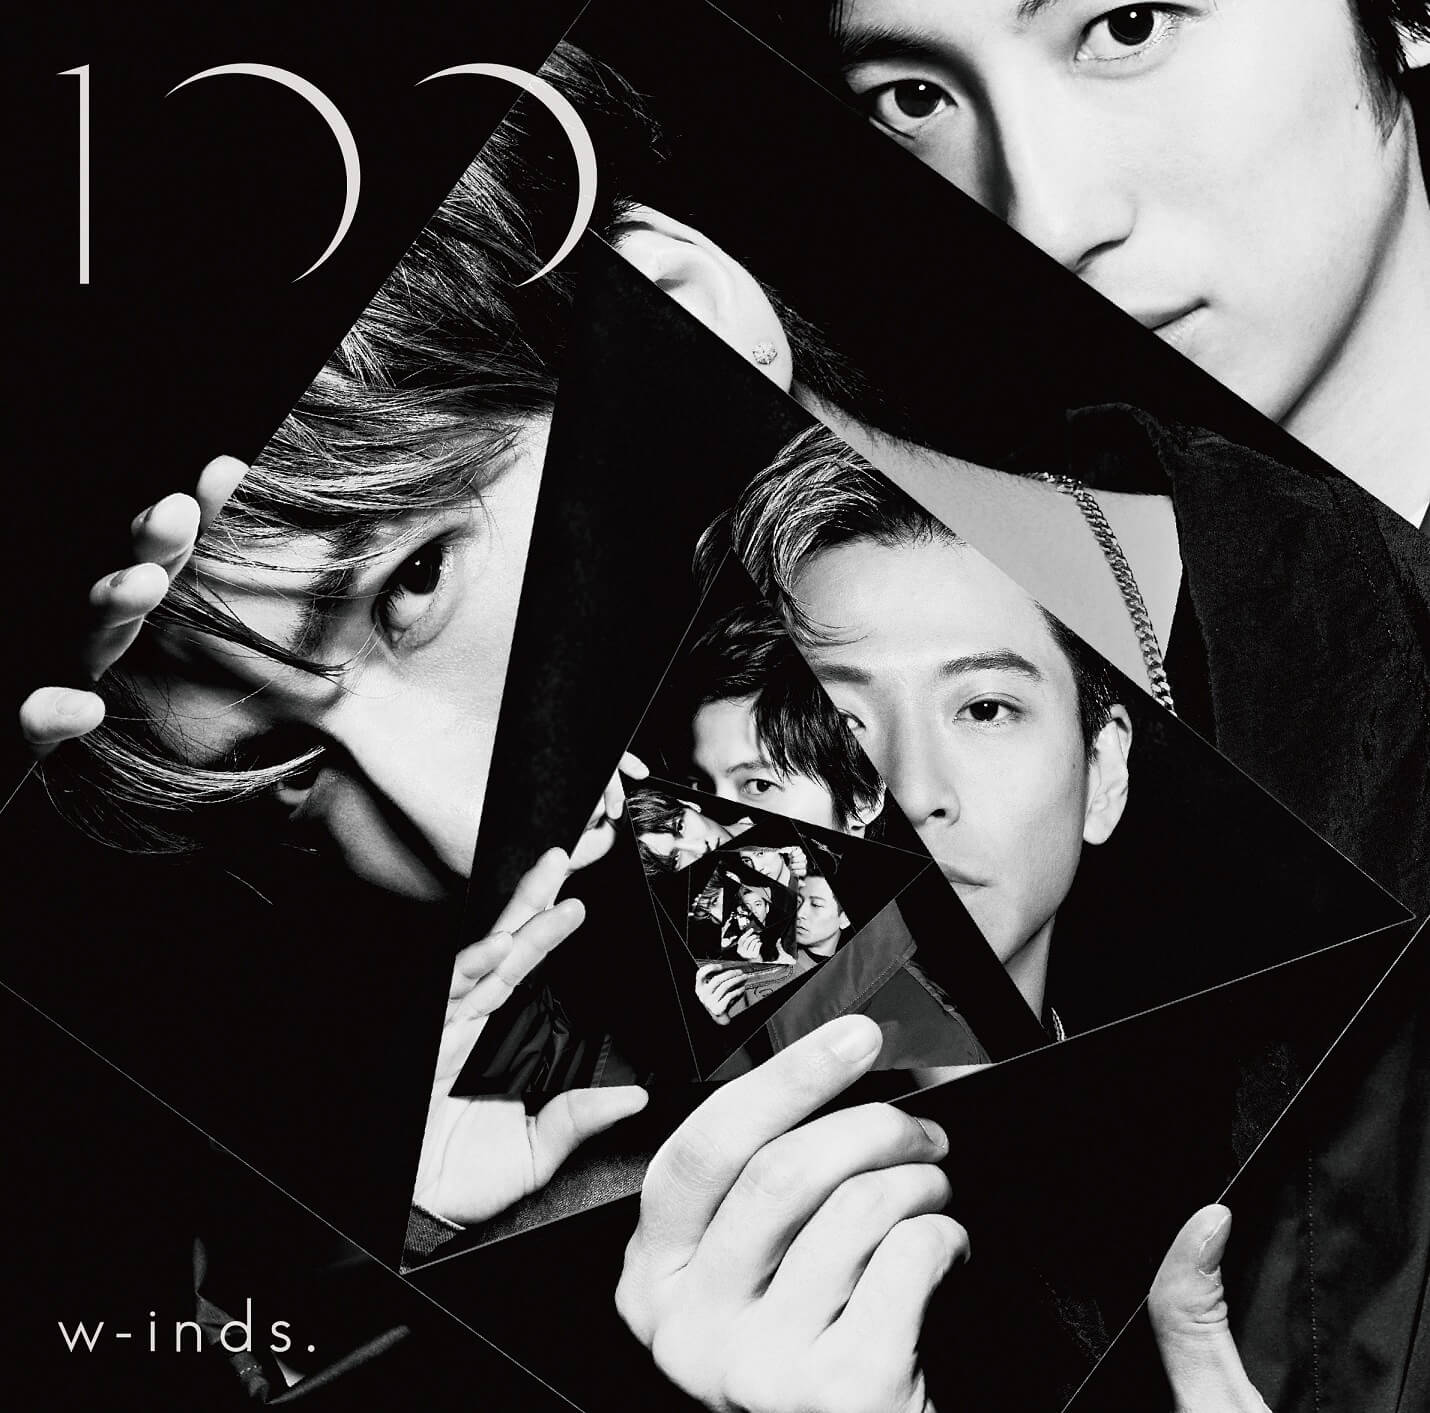 w-inds._100_CD__ジャケット